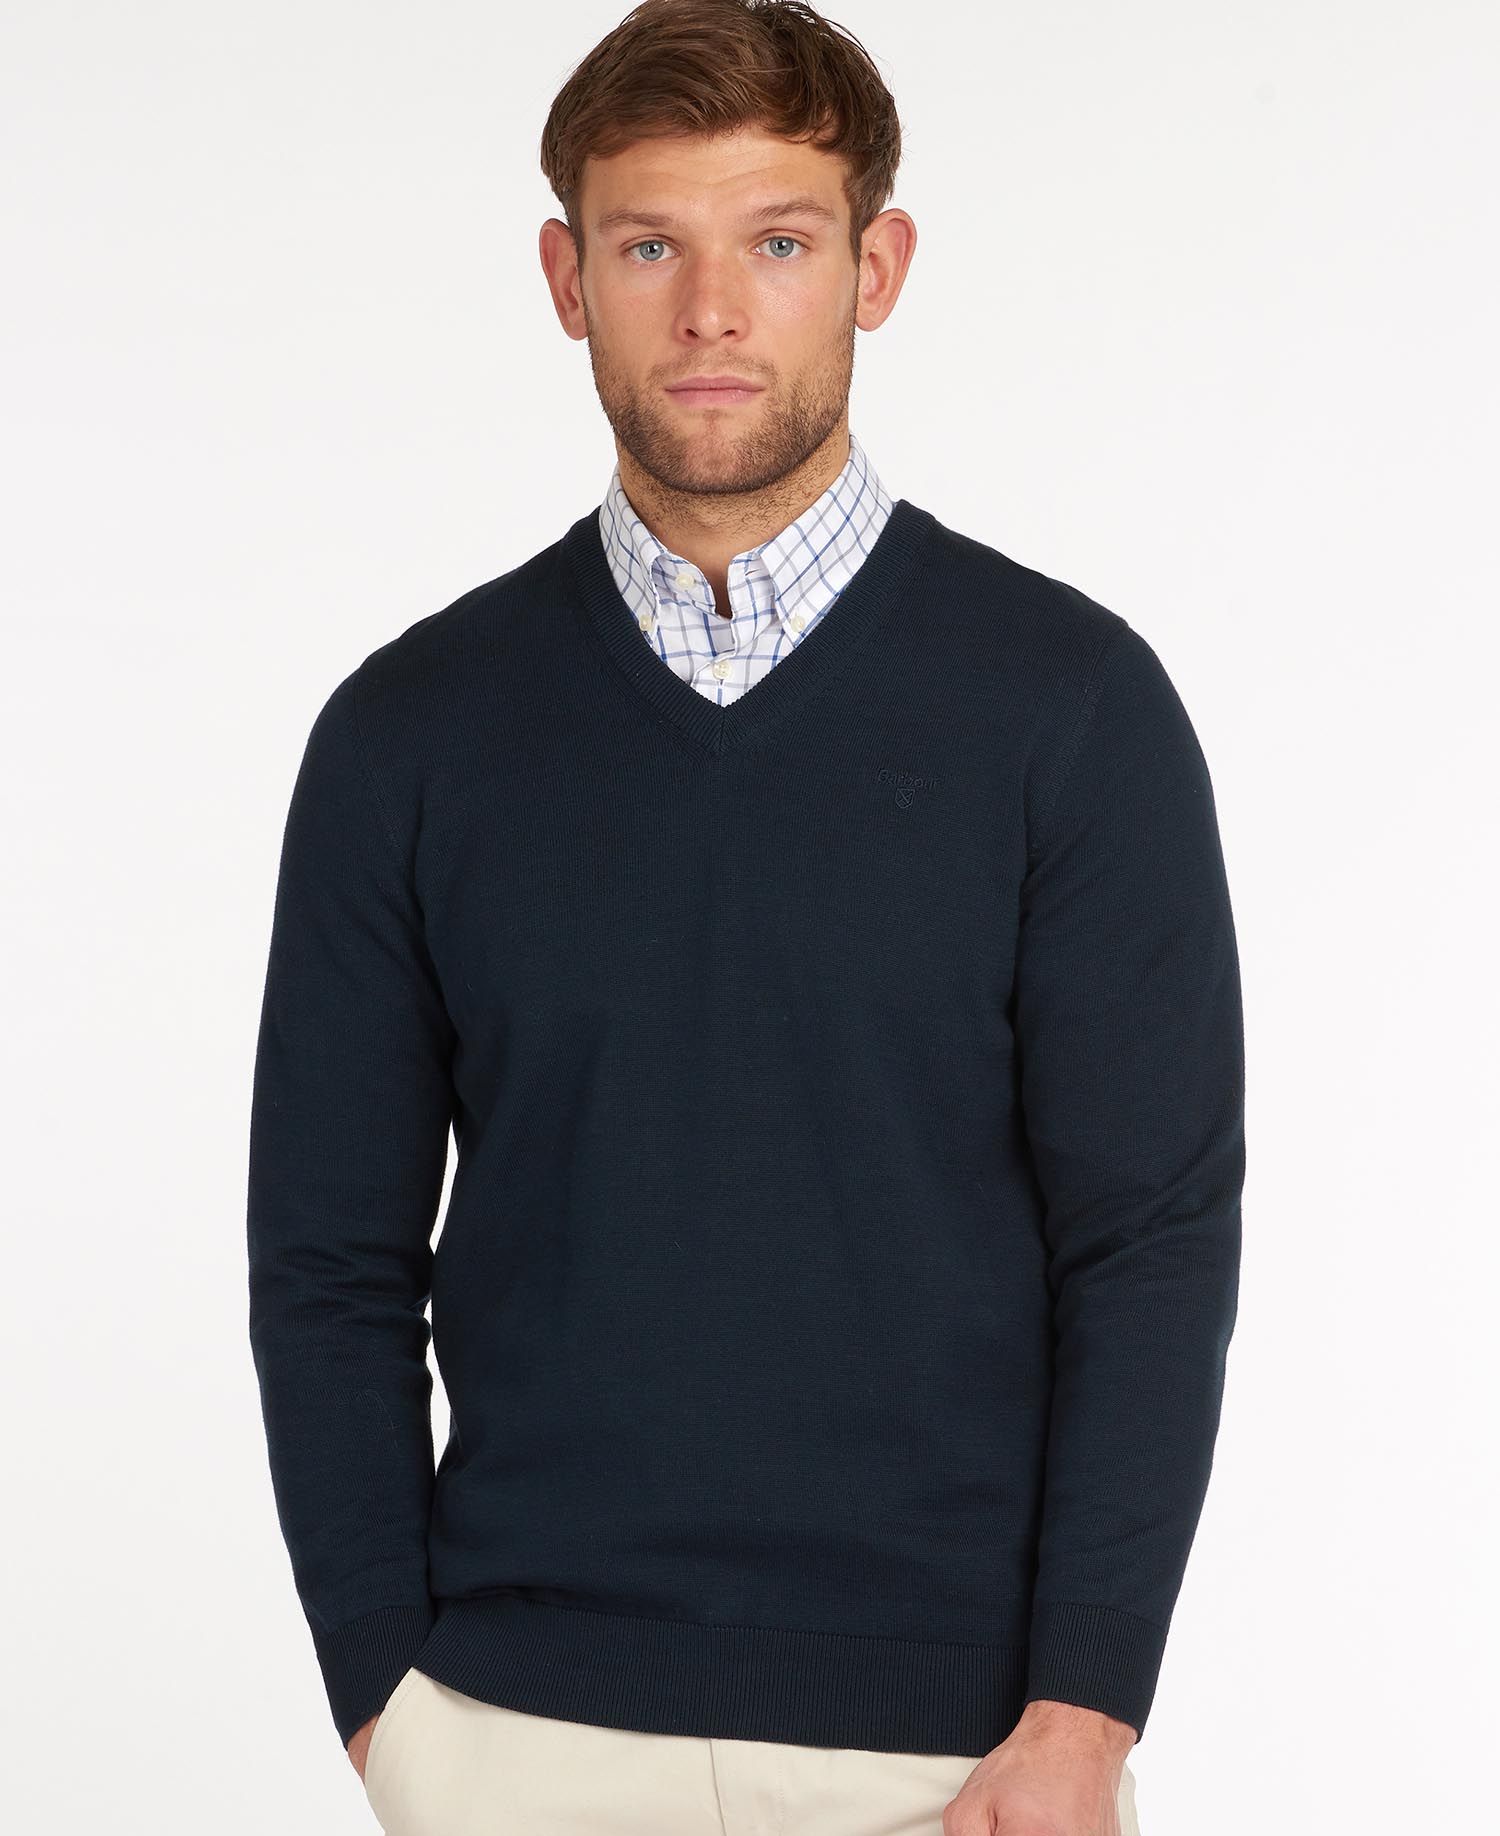 BARBOUR PIMA COTTON V-NECK SWEATER NAVY - Dartmoor Country Clothes